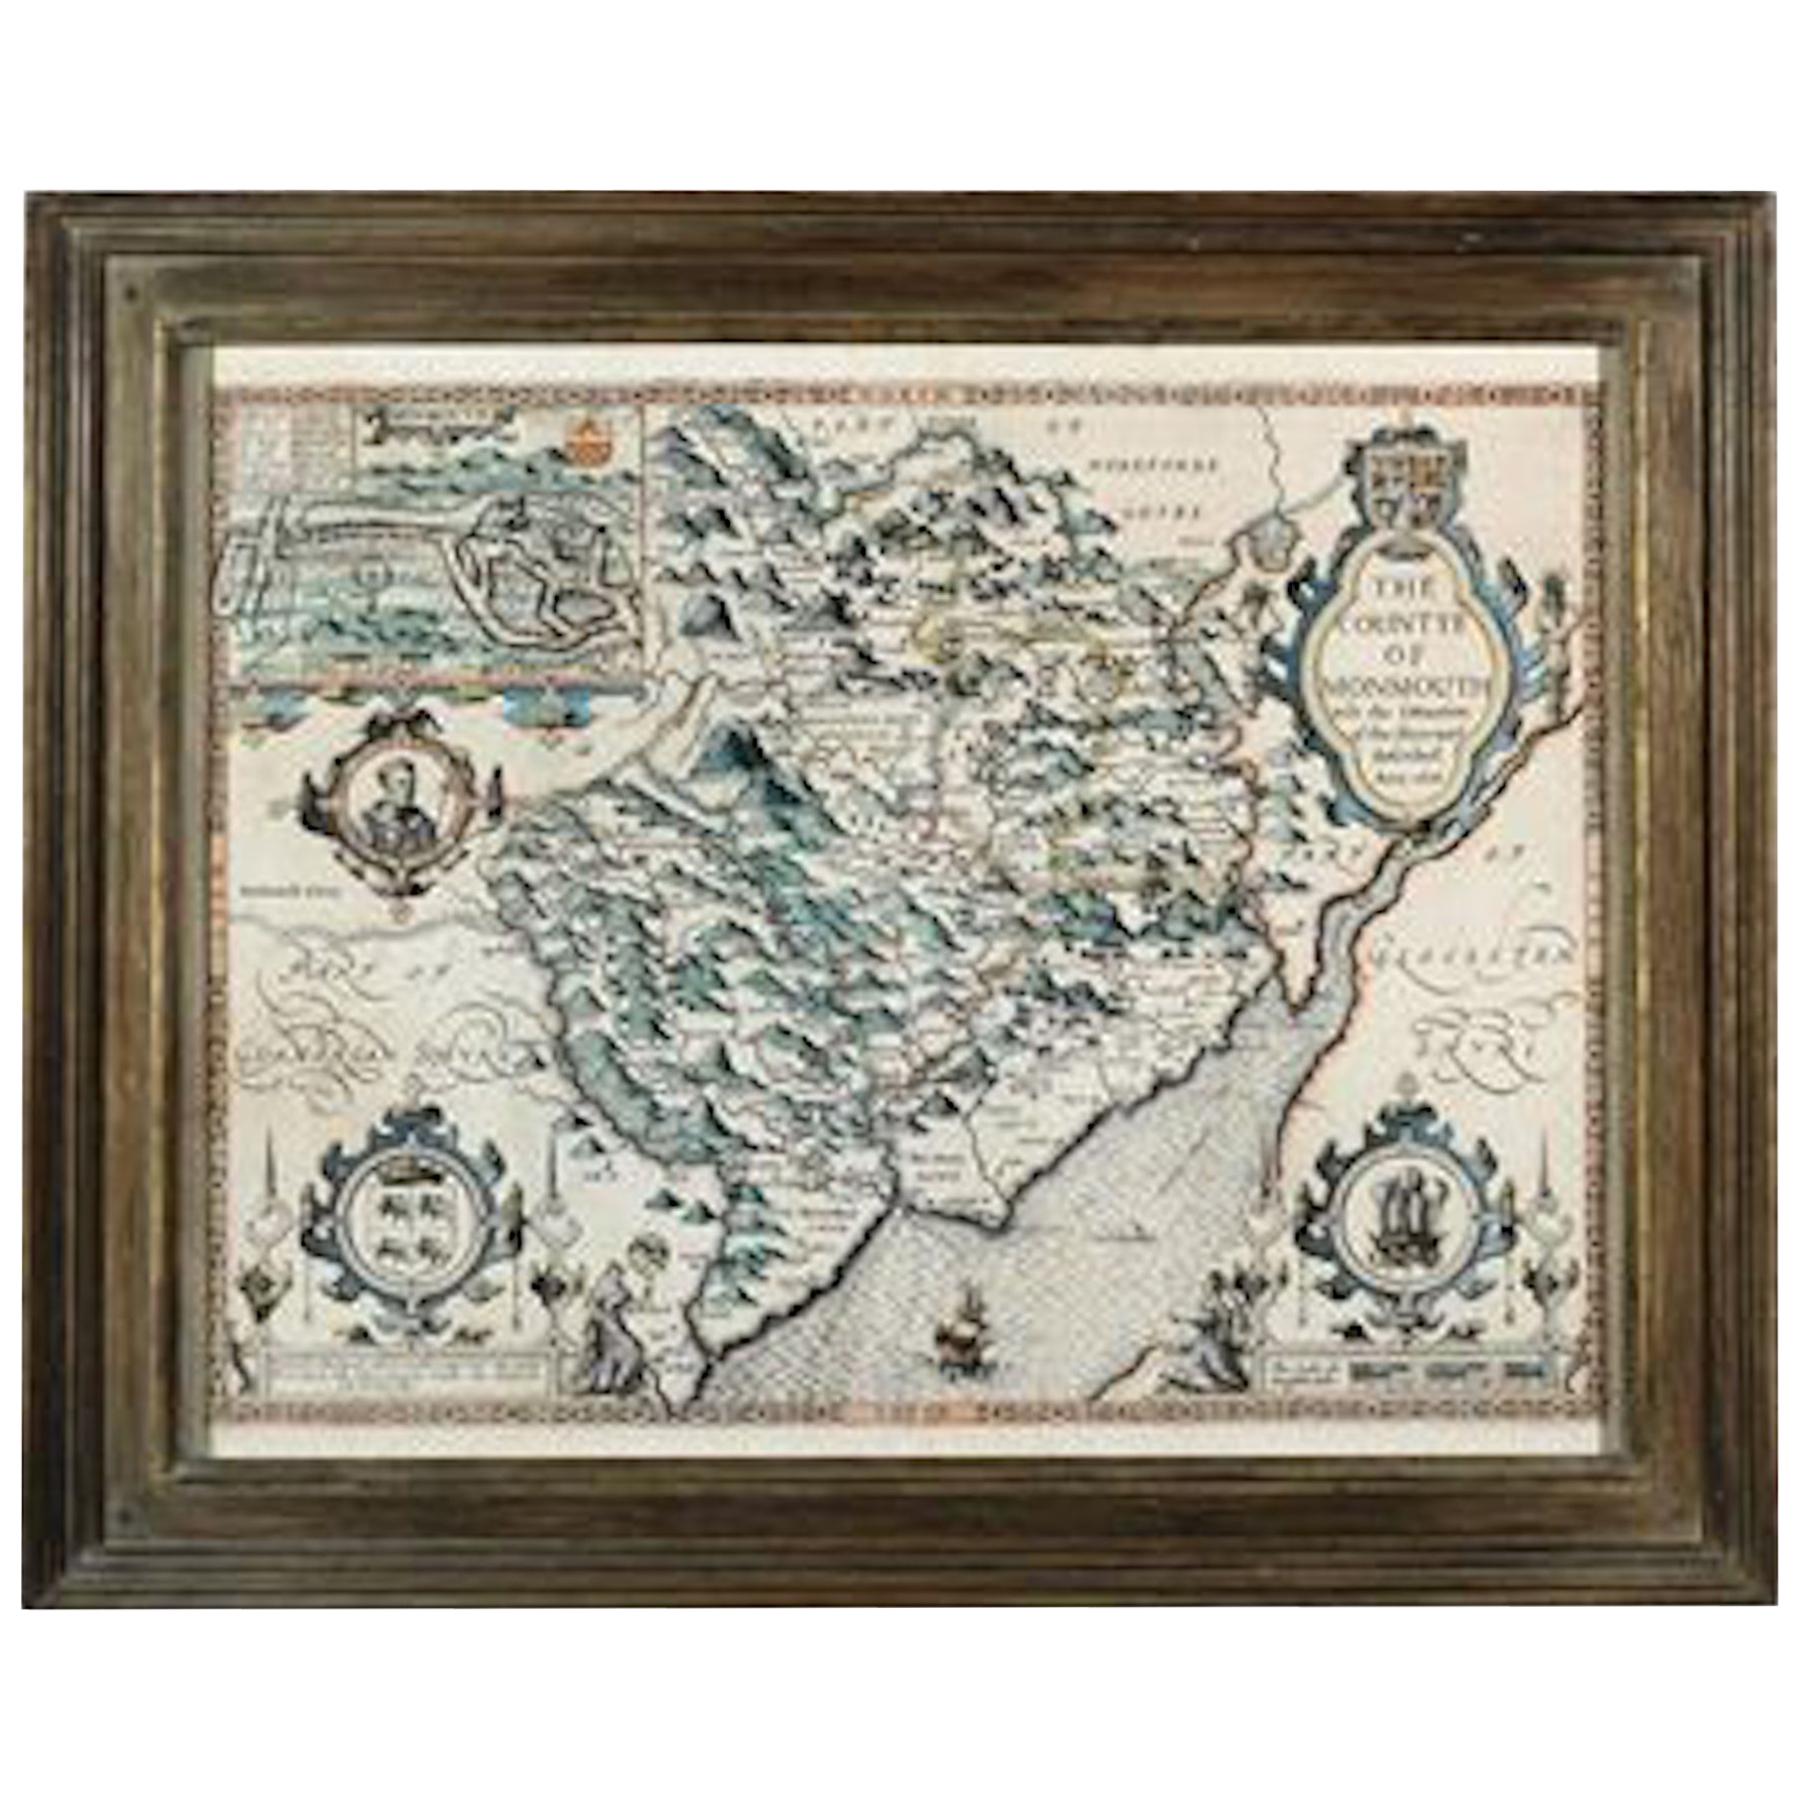 Countye of Monmouth, Dated 1610 For Sale